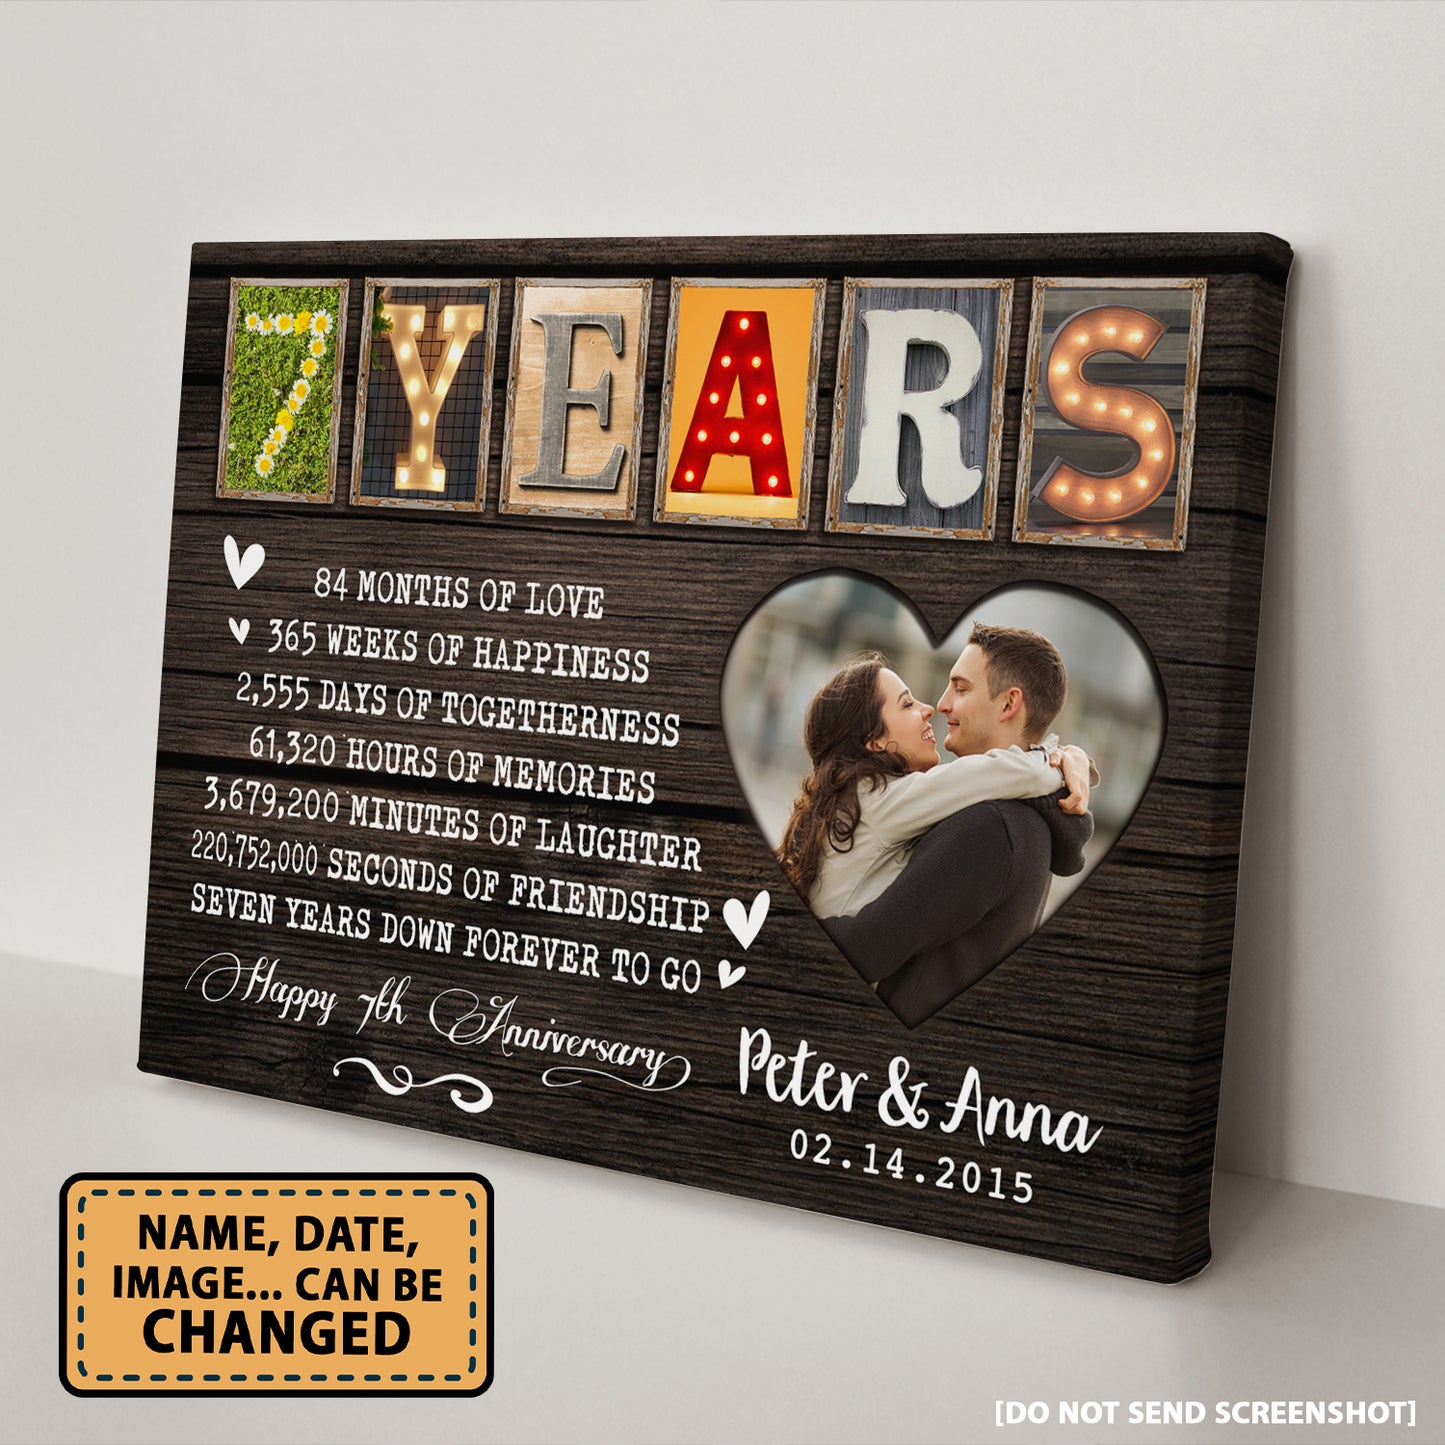 Personalized Picture Frames 7th 7 Year Wedding Anniversary Gifts